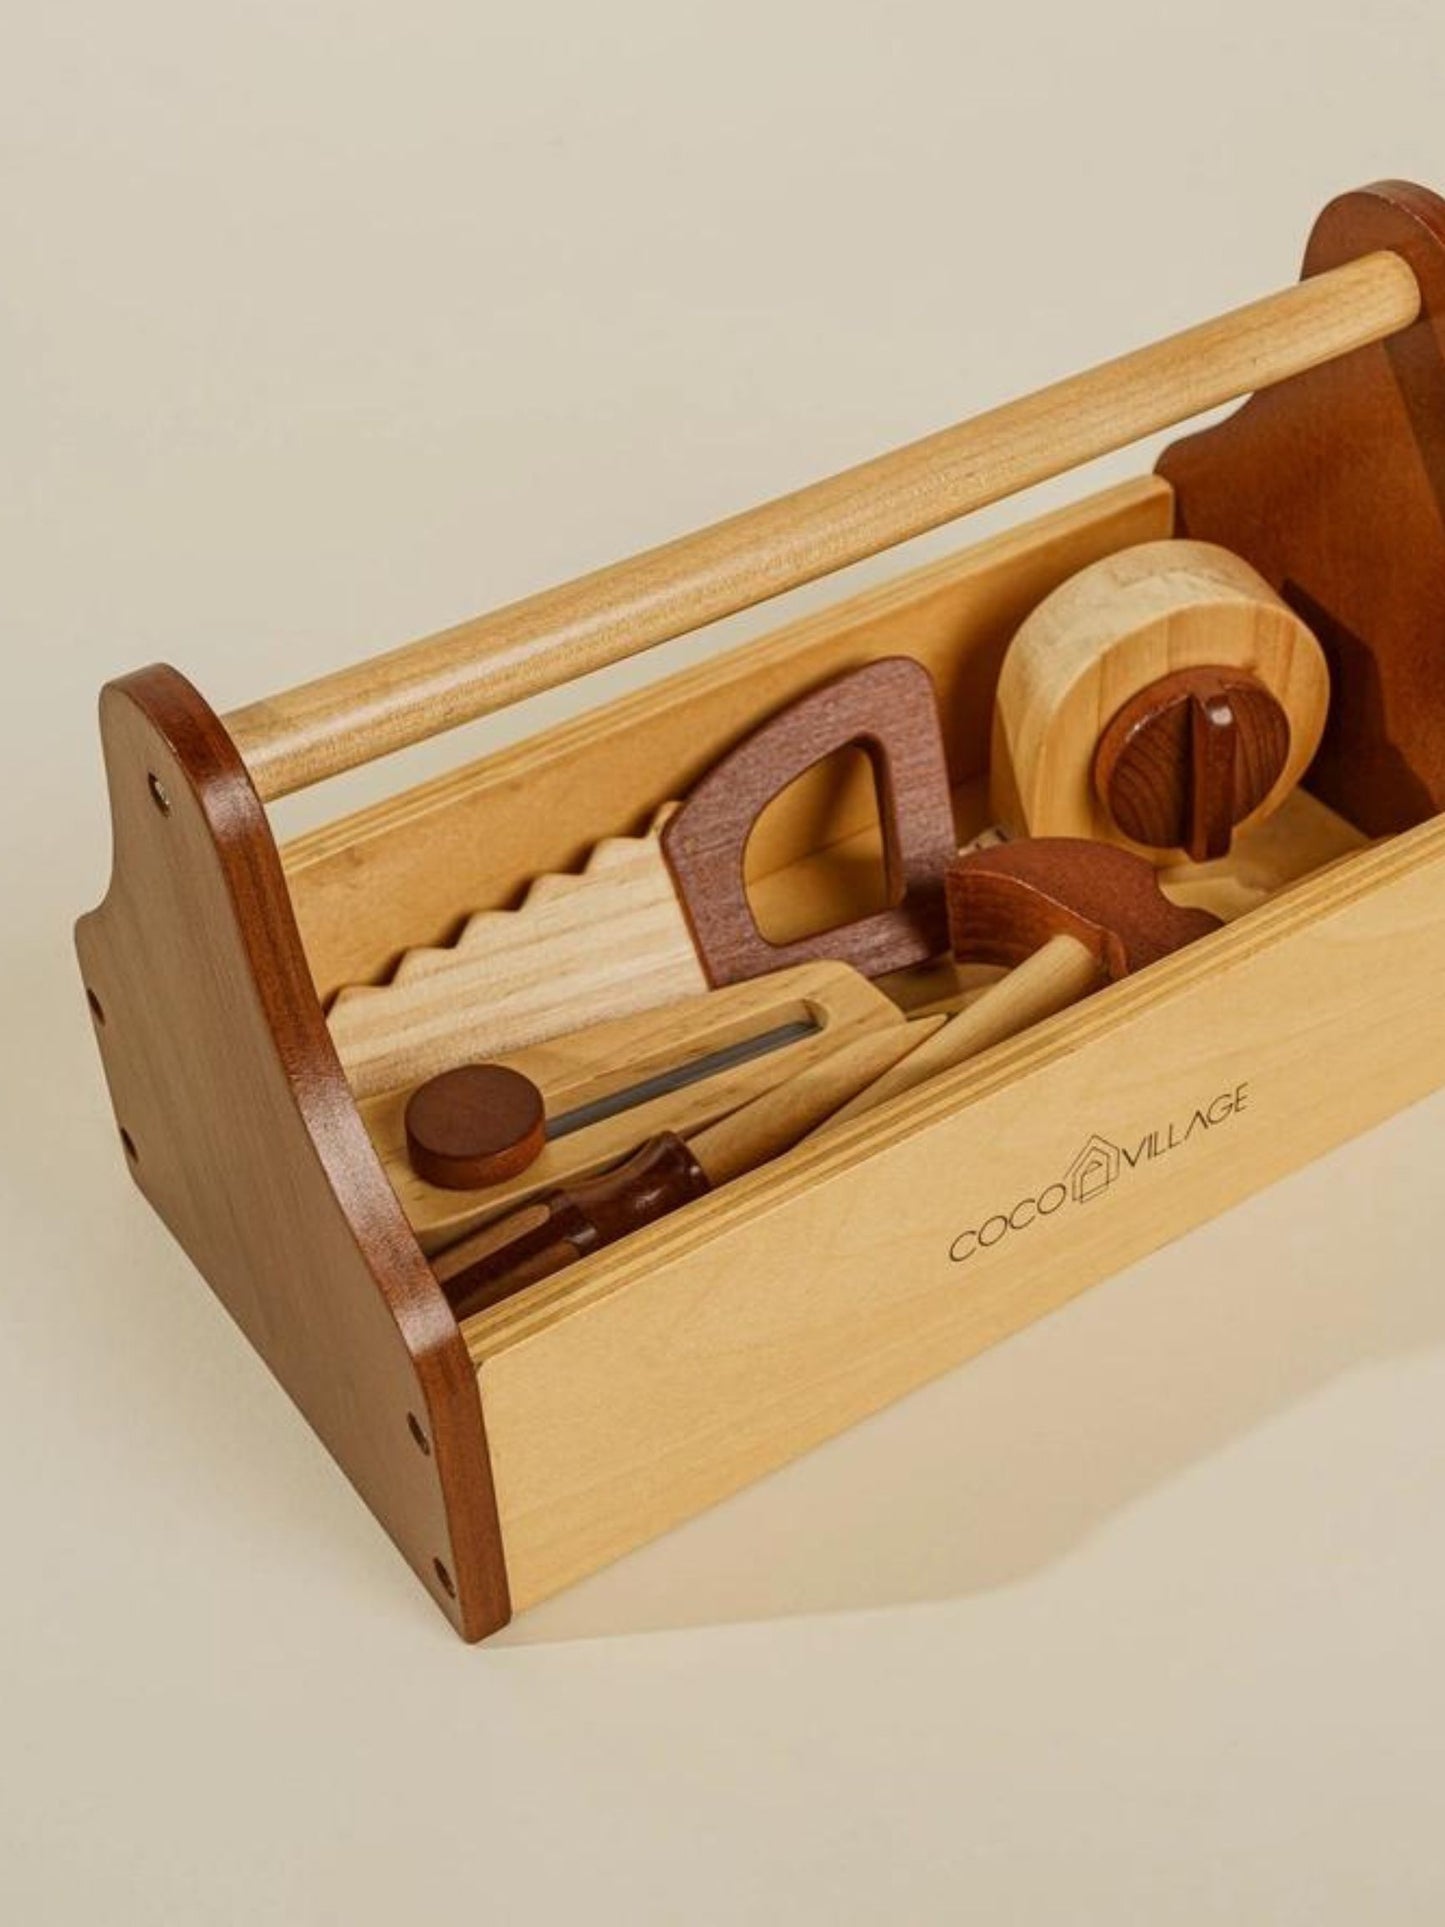 Wooden Tool Playset